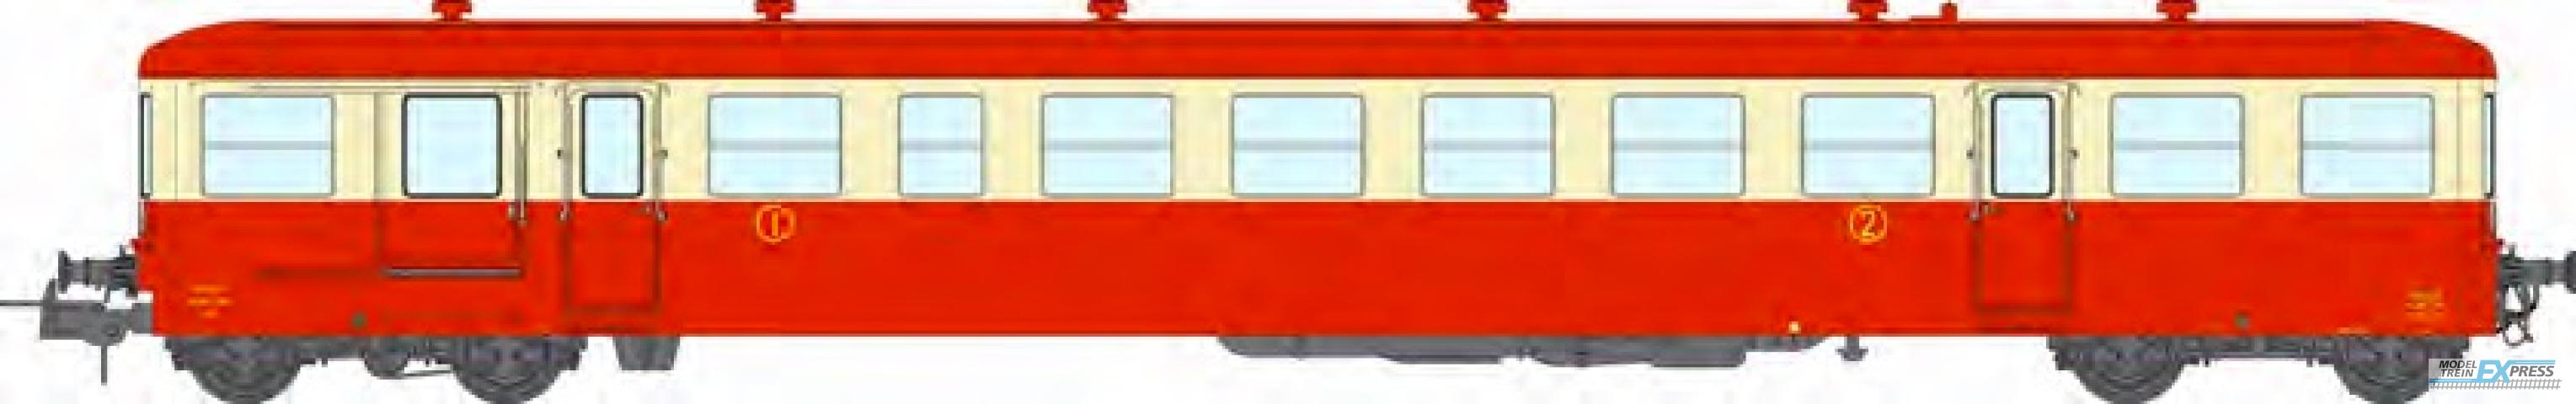 REE models VB-446 XR-7360 Small van, Red-Cream with Red Roof SOTTEVILLE Era IV